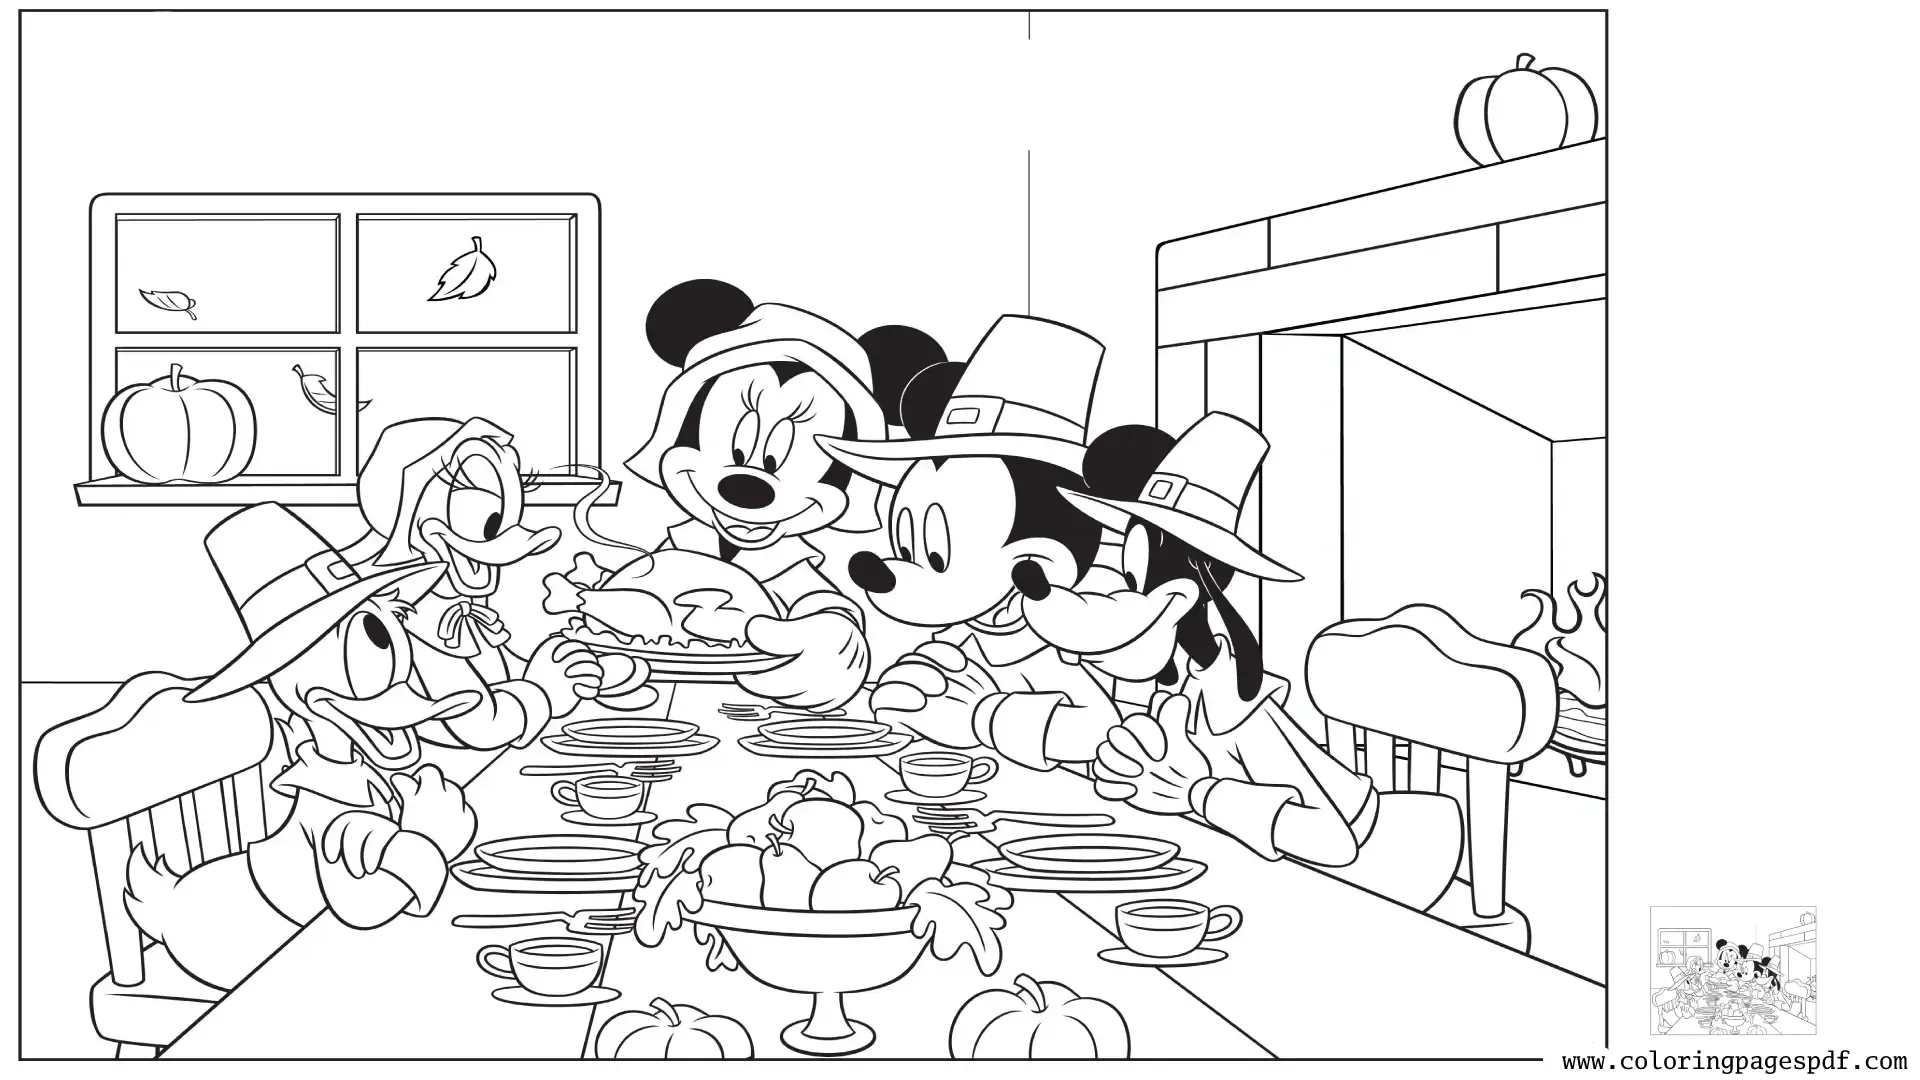 Coloring Page Of Mickey Mouse Enjoying Thanksgiving With His Friends